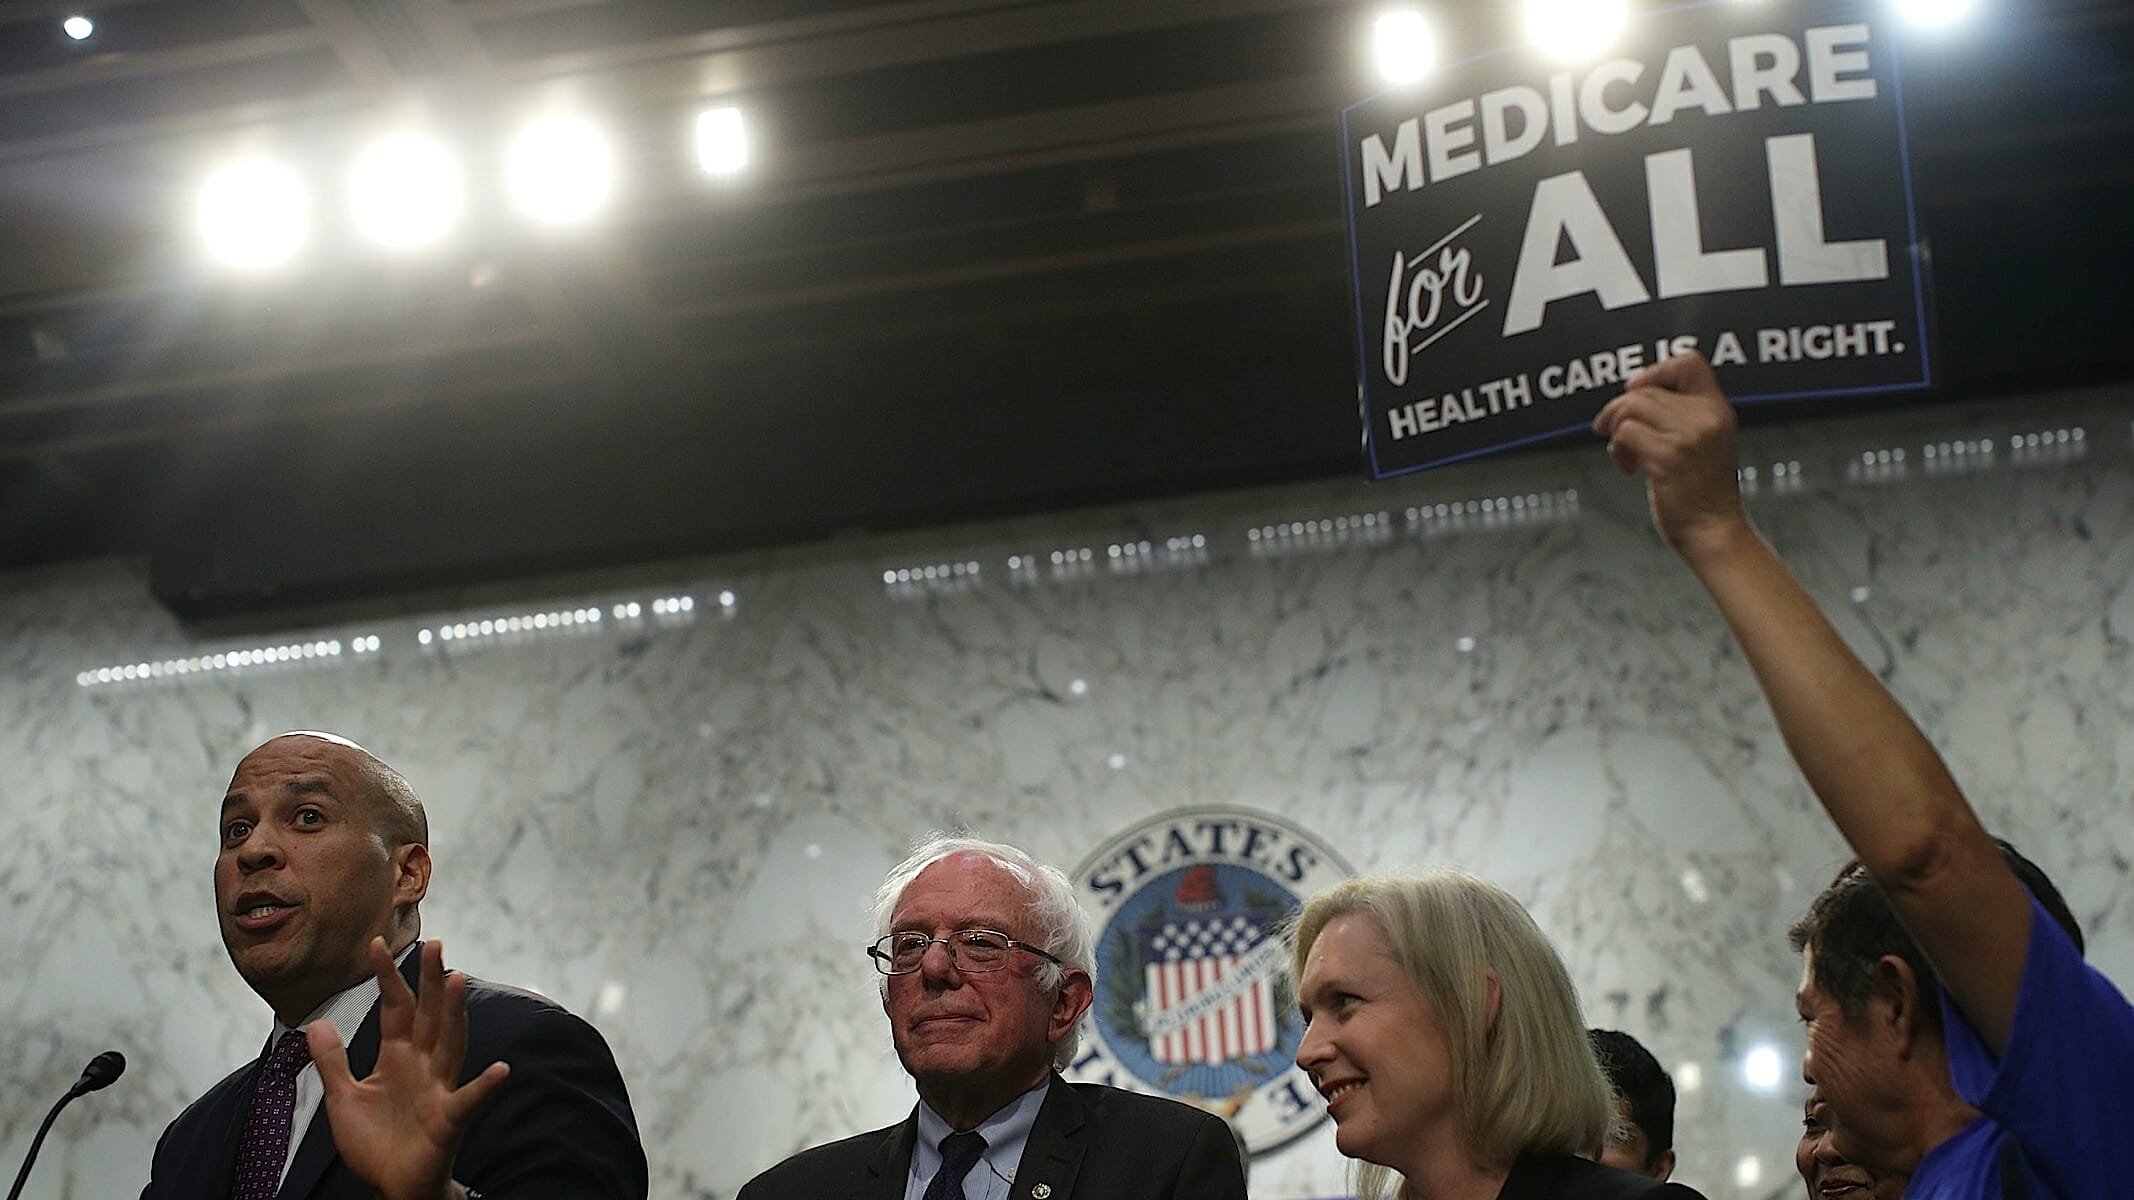 Medicare For All Will Save You Money Even Though It Will Raise Taxes. It’s Time for Americans to Grasp This Concept.